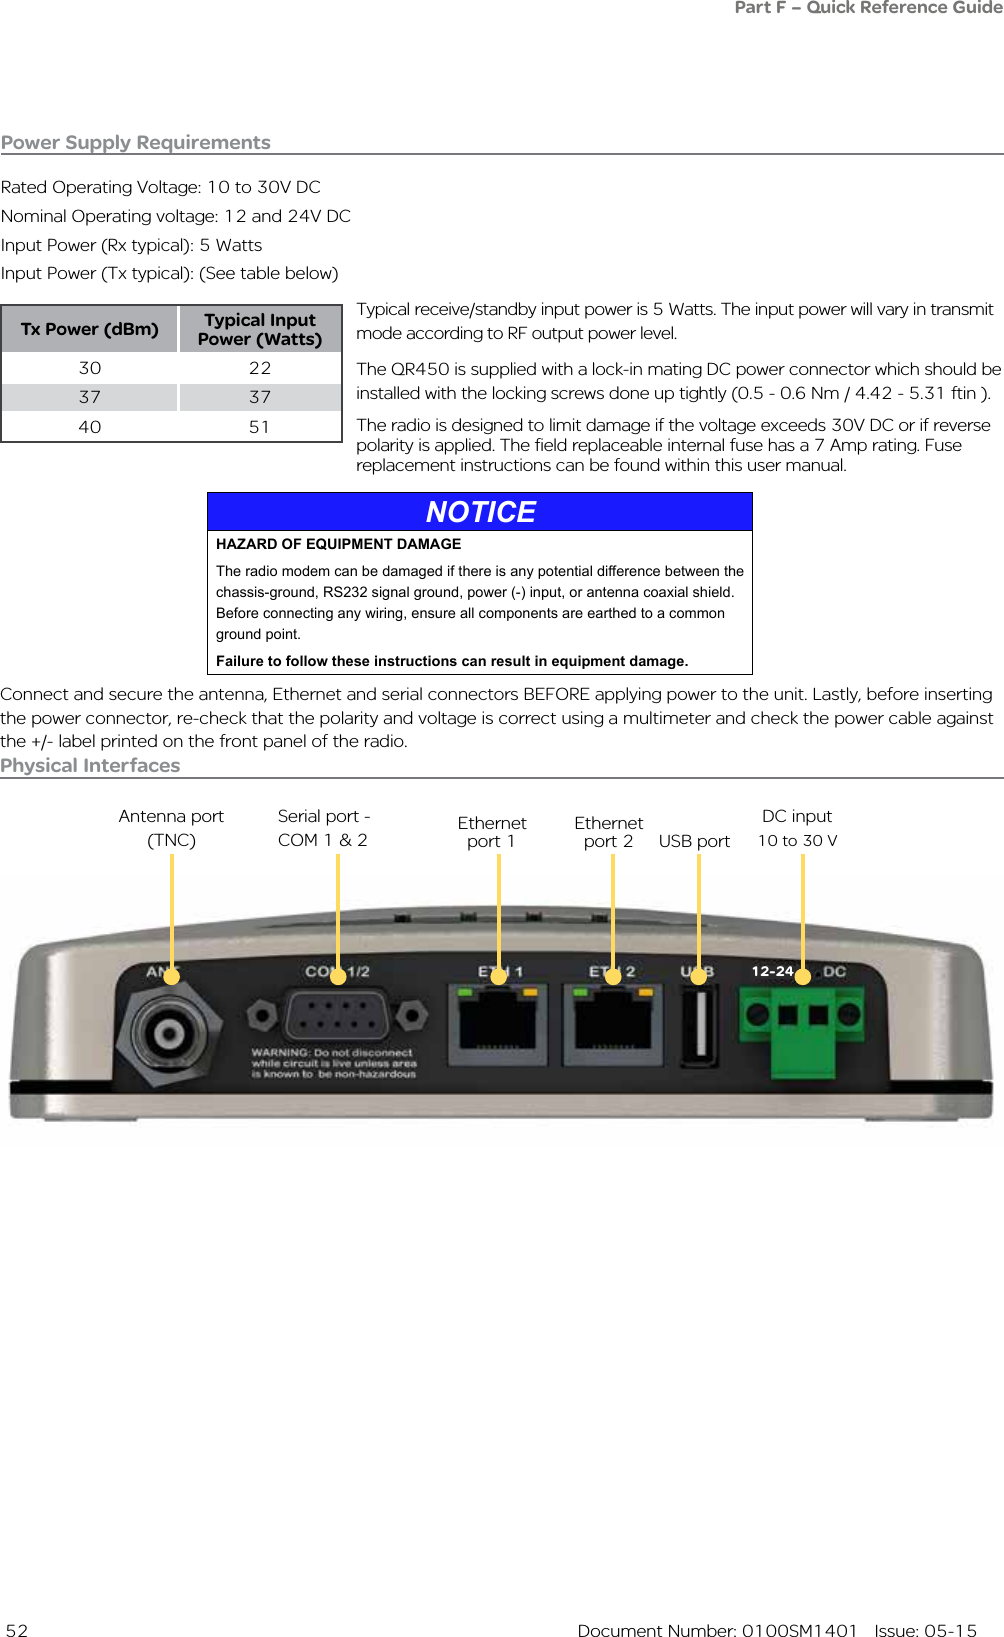  52  Document Number: 0100SM1401   Issue: 05-15Physical InterfacesAntenna port (TNC)Serial port - COM 1 &amp; 2 Ethernet         USB port DC input 10 to 30 Vport 1Ethernet        port 2Power Supply RequirementsRated Operating Voltage: 10 to 30V DCNominal Operating voltage: 12 and 24V DCInput Power (Rx typical): 5 Watts Input Power (Tx typical): (See table below)Typical receive/standby input power is 5 Watts. The input power will vary in transmit mode according to RF output power level.The QR450 is supplied with a lock-in mating DC power connector which should be installed with the locking screws done up tightly (0.5 - 0.6 Nm / 4.42 - 5.31 ftin ). The radio is designed to limit damage if the voltage exceeds 30V DC or if reverse polarity is applied. The field replaceable internal fuse has a 7 Amp rating. Fuse replacement instructions can be found within this user manual. Tx Power (dBm) Typical Input Power (Watts)30 2237 3740 51Connect and secure the antenna, Ethernet and serial connectors BEFORE applying power to the unit. Lastly, before inserting the power connector, re-check that the polarity and voltage is correct using a multimeter and check the power cable against the +/- label printed on the front panel of the radio.Part F – Quick Reference GuideNOTICEHAZARD OF EQUIPMENT DAMAGEThe radio modem can be damaged if there is any potential difference between the chassis-ground, RS232 signal ground, power (-) input, or antenna coaxial shield. Before connecting any wiring, ensure all components are earthed to a common ground point.Failure to follow these instructions can result in equipment damage.12-24